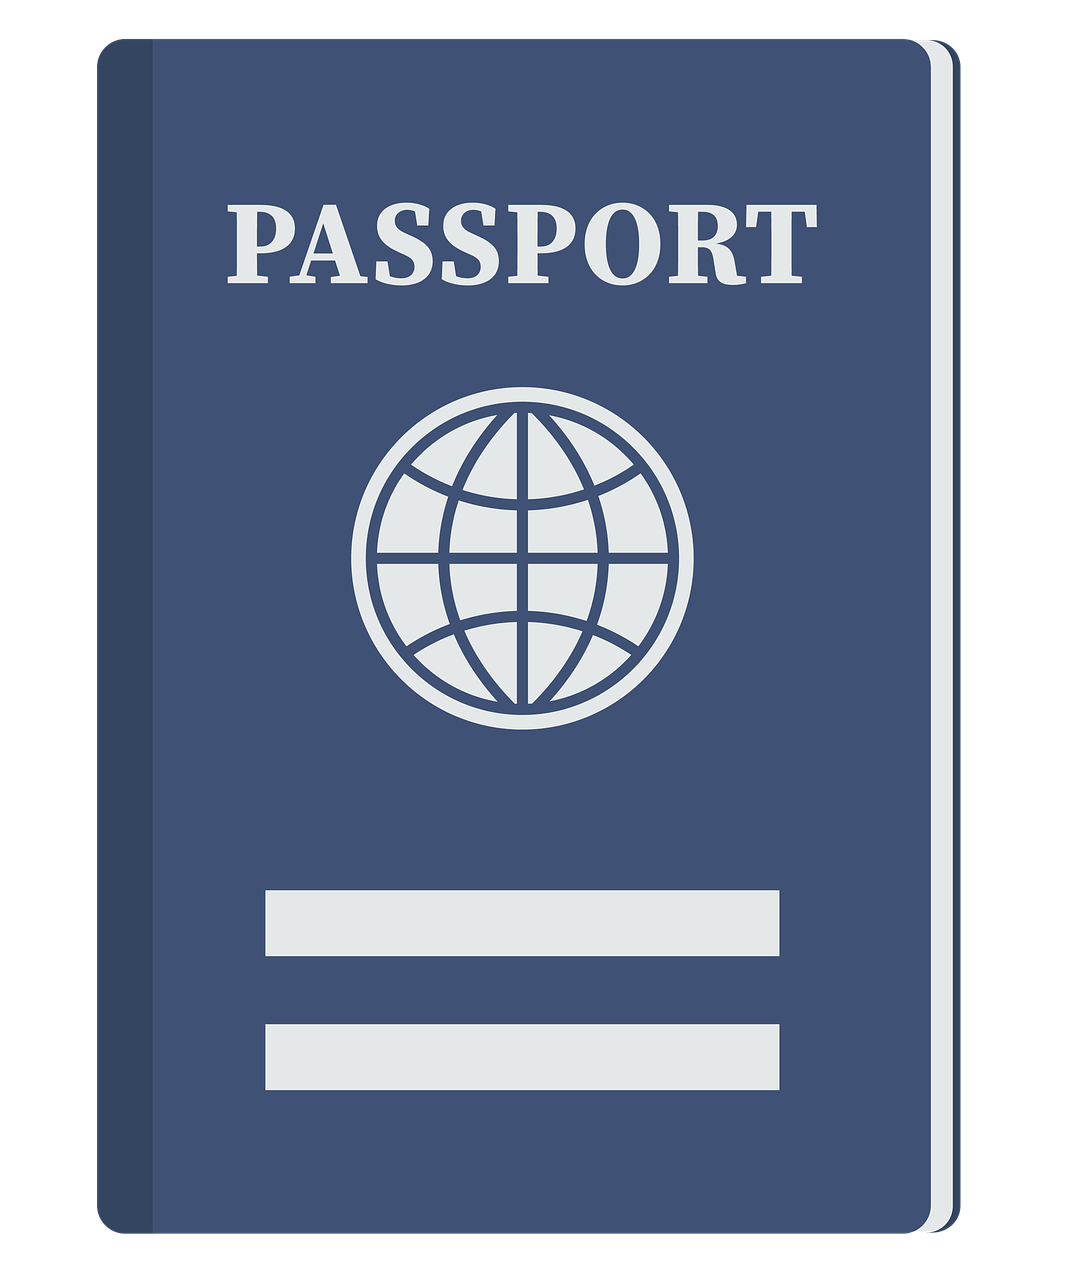 What Is A Reference Visa Number?